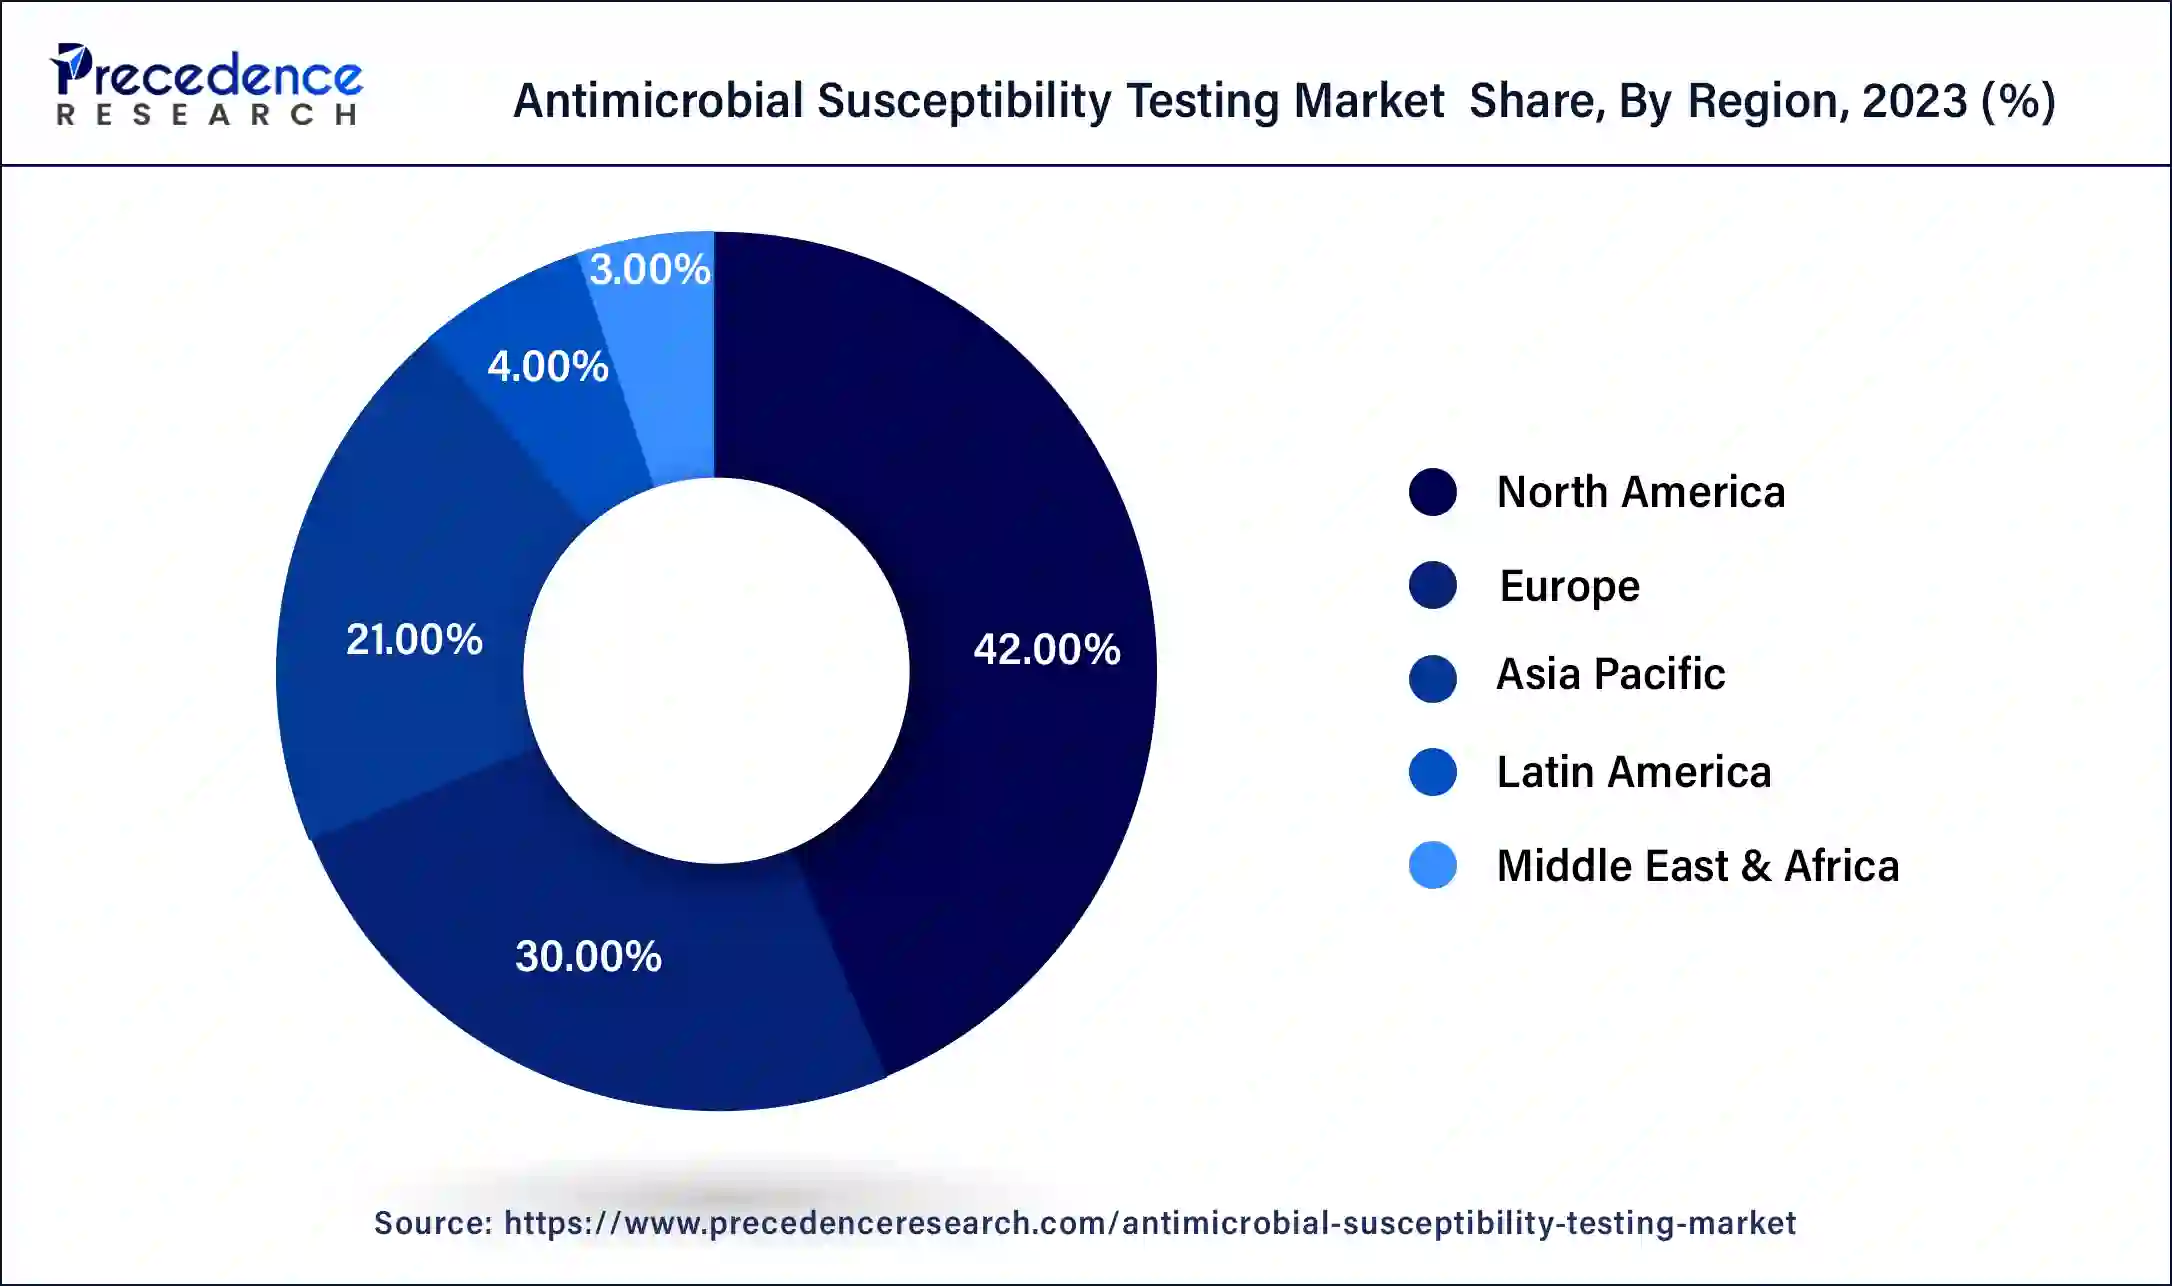 Antimicrobial Susceptibility Testing Market Share, By Region, 2023 (%)